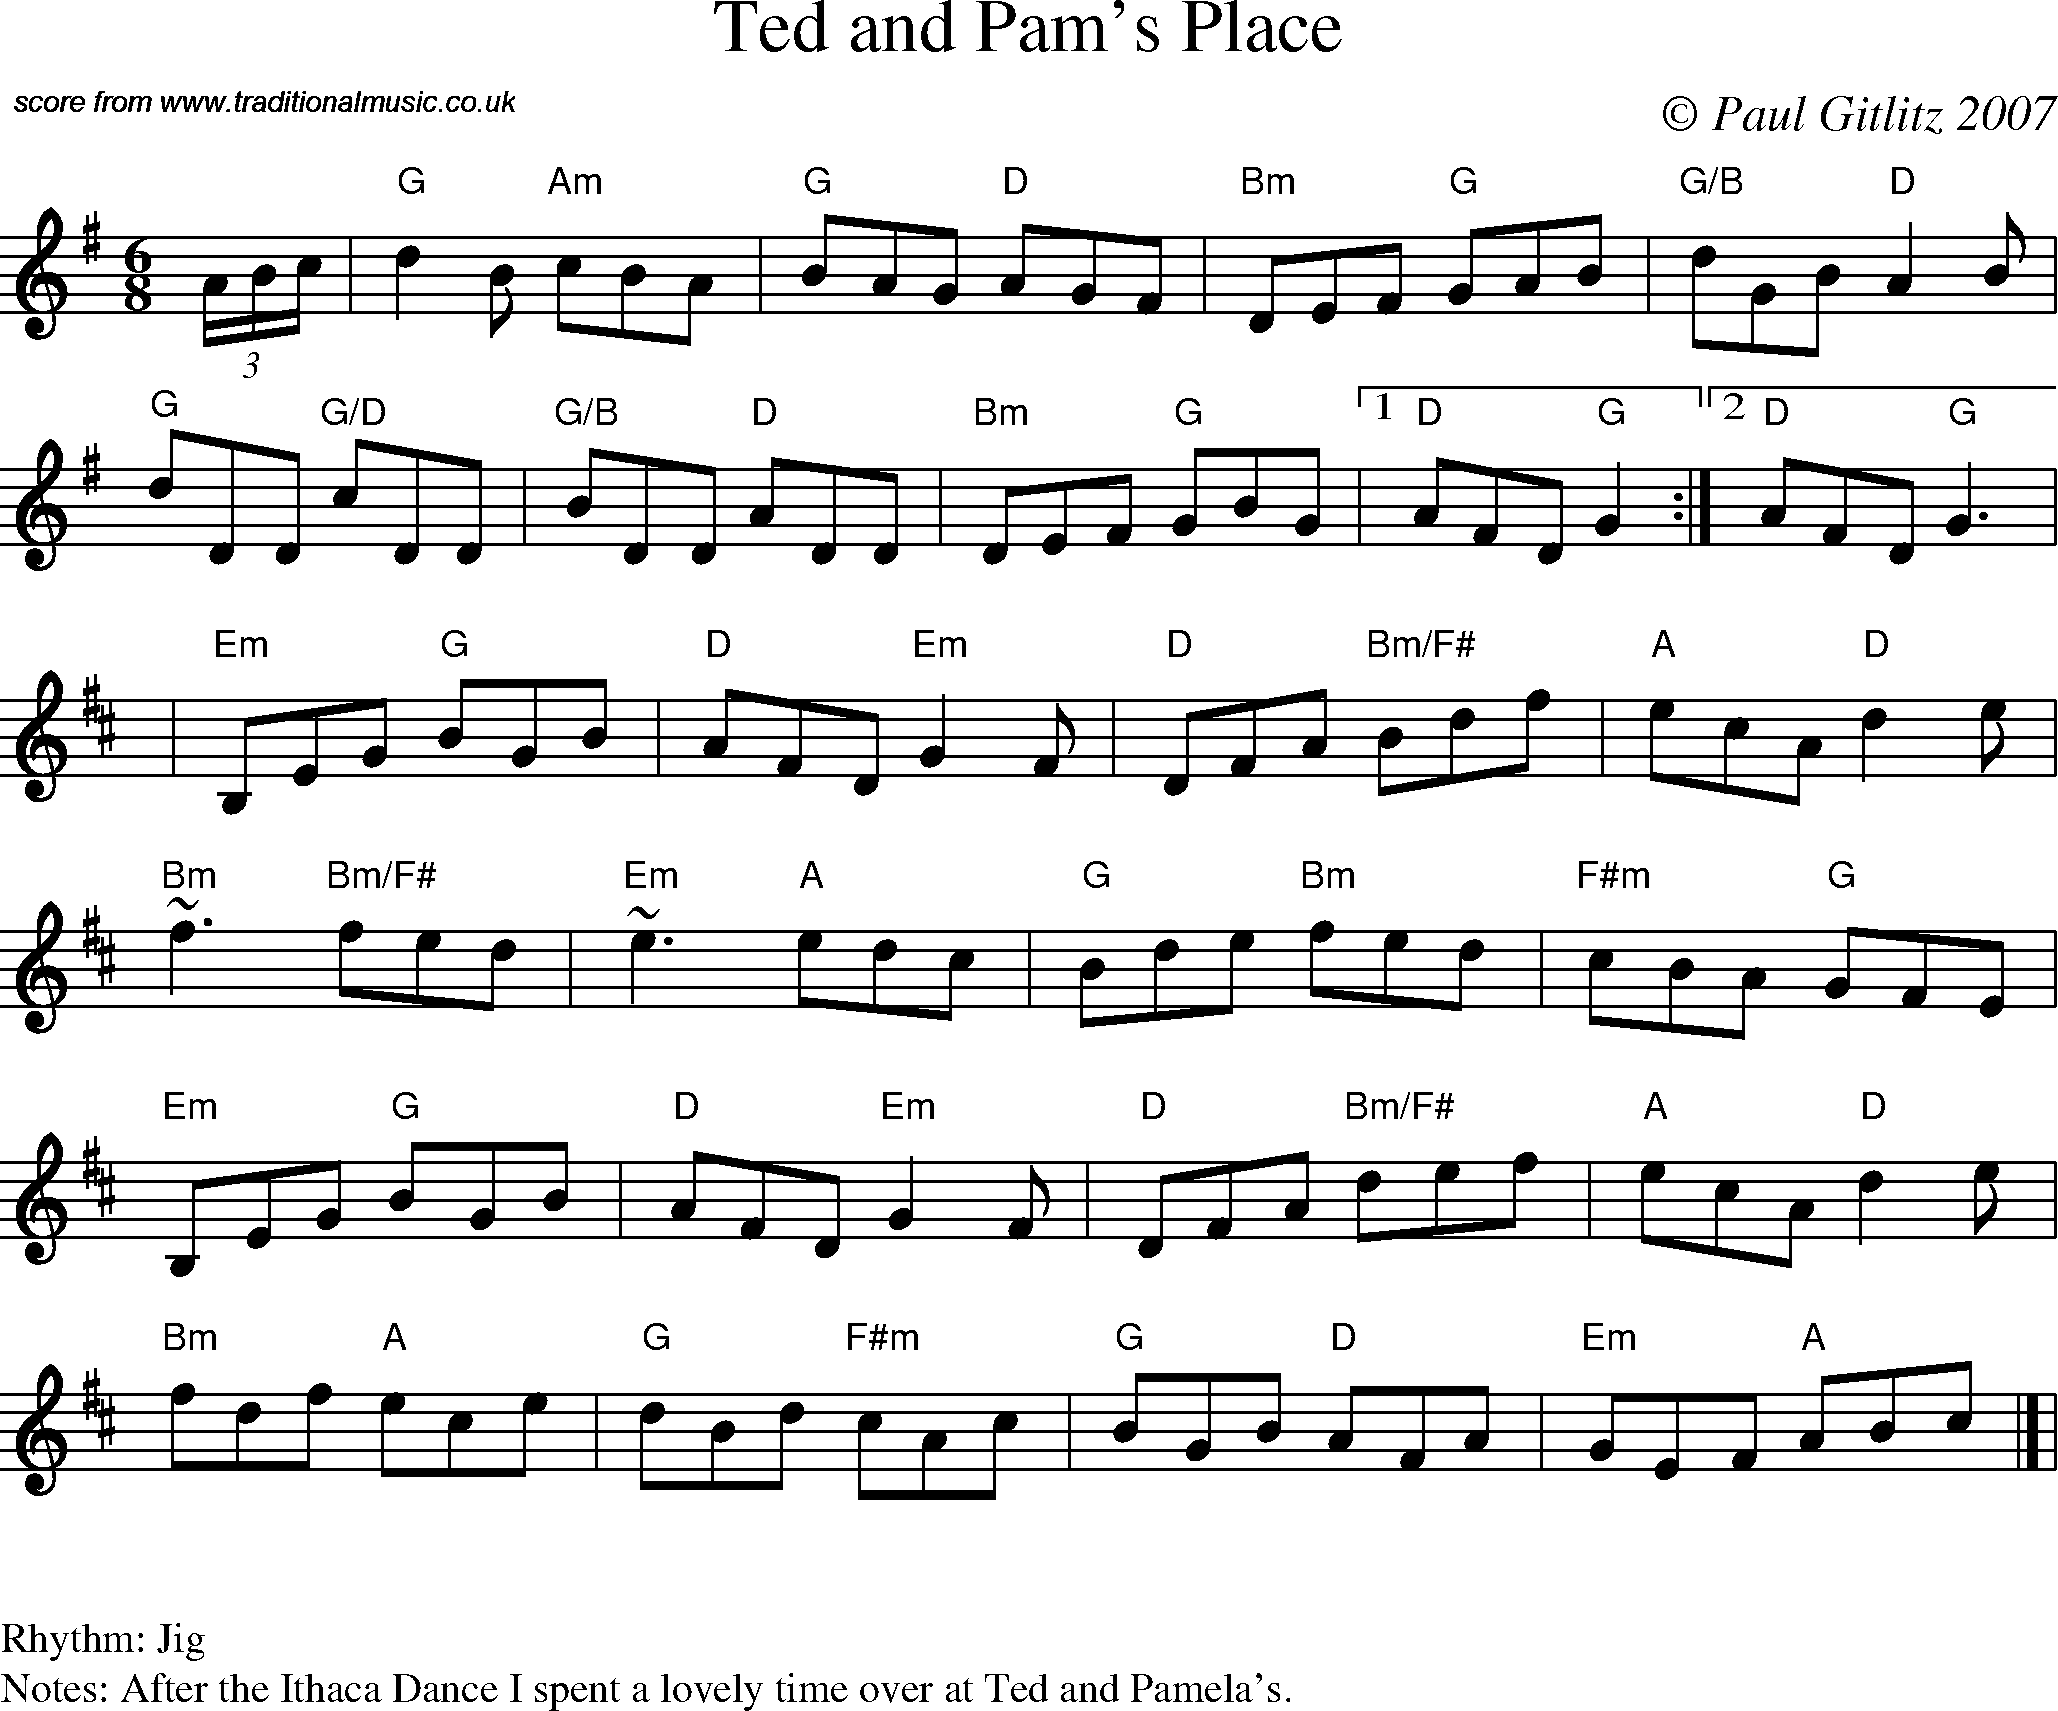 Sheet Music Score for Jig - Ted and Pam's Place